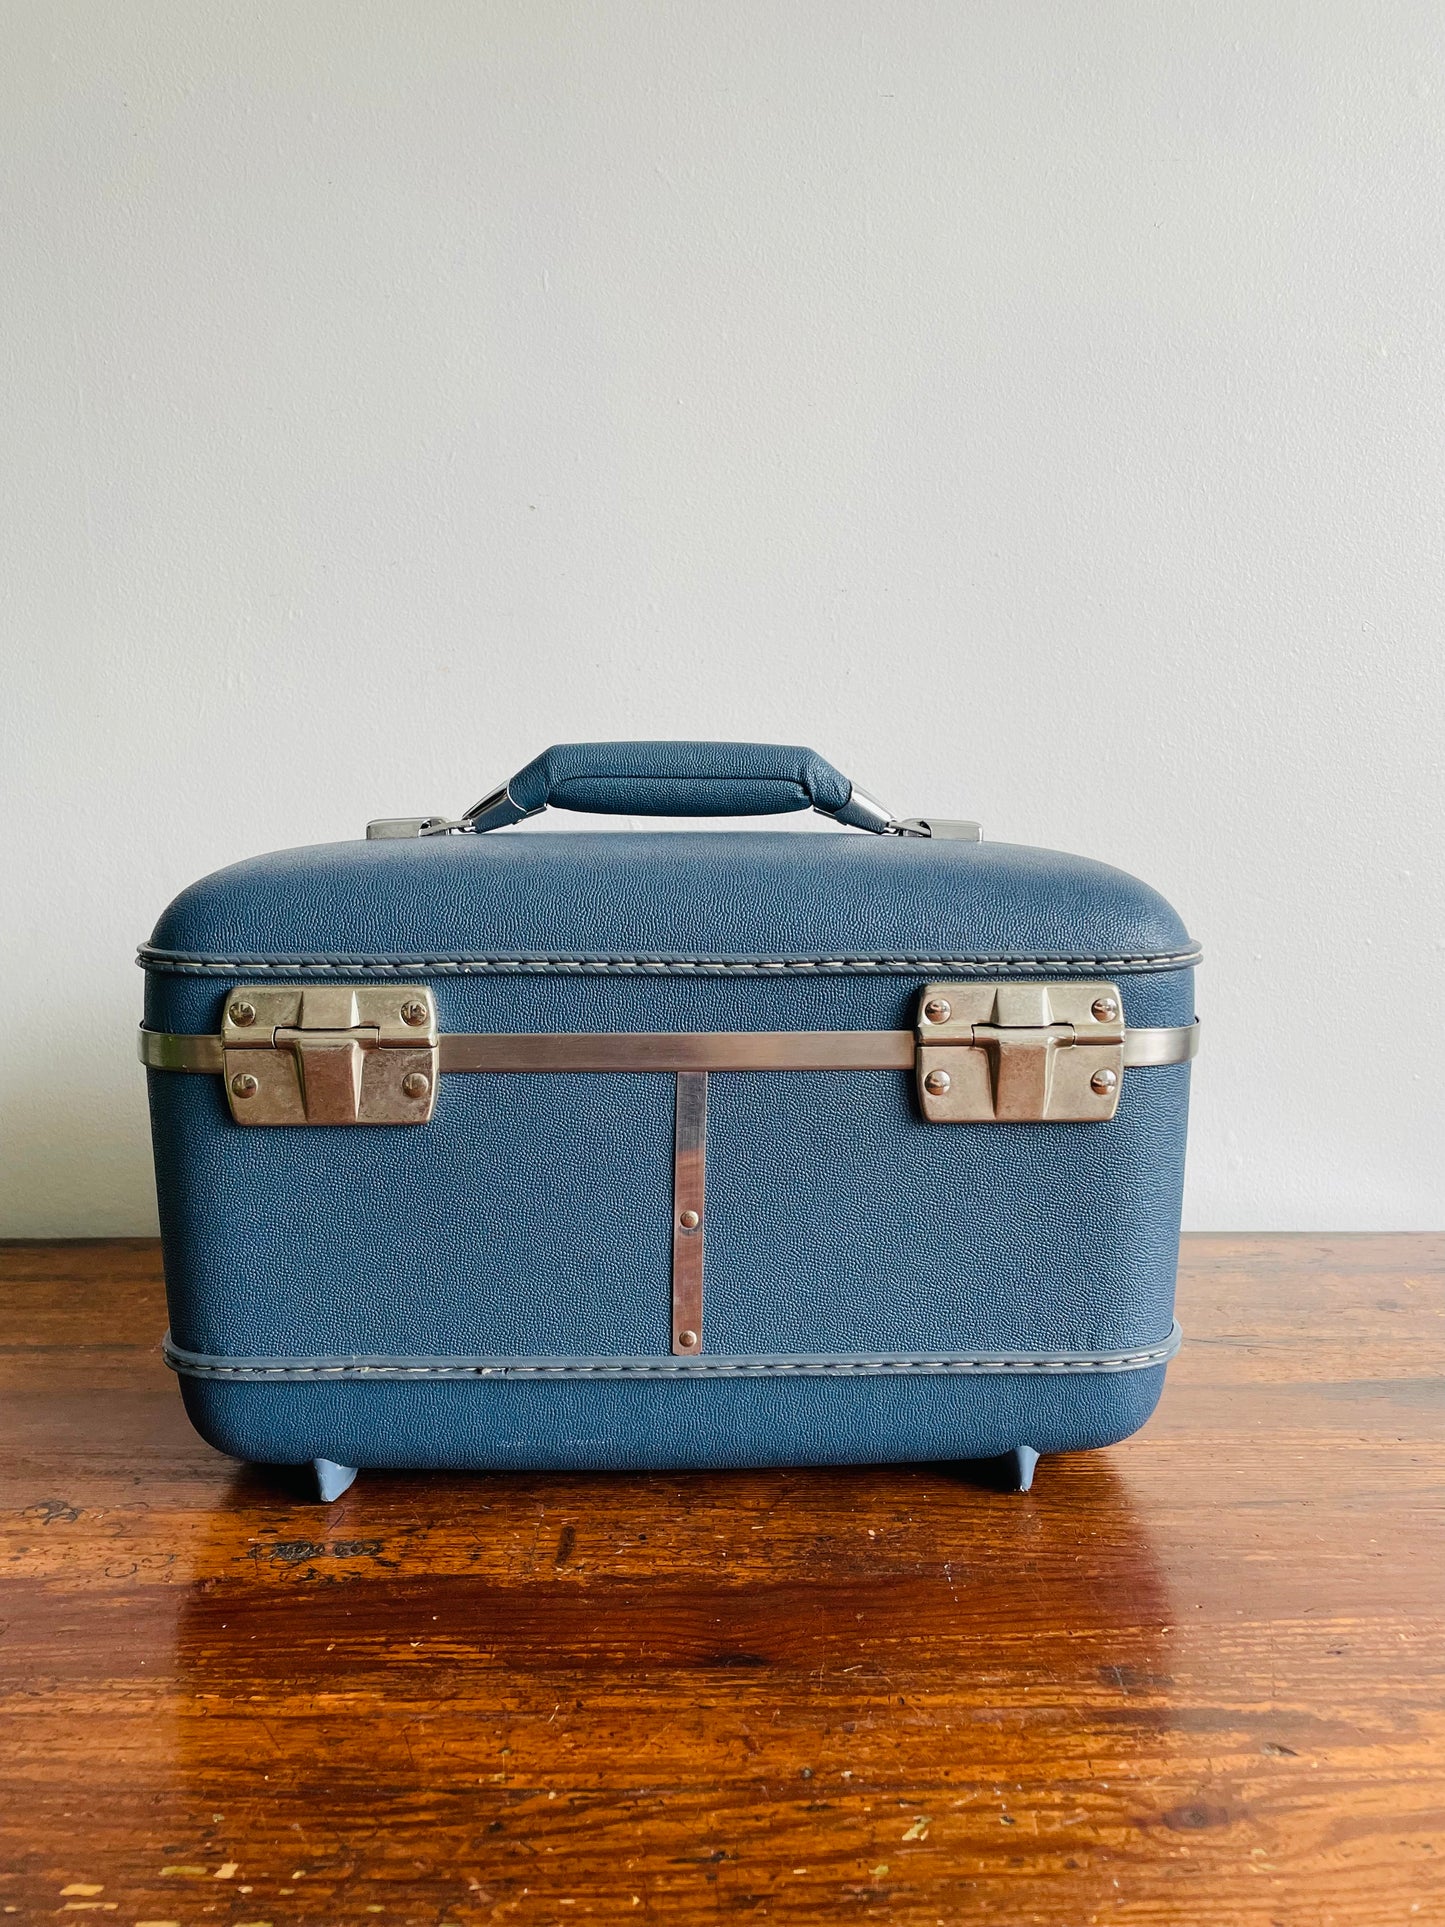 American Tourister Tri-Taper Blue Hard Shell Luggage Travel Case - Great for Make-Up, Toiletries, Etc.